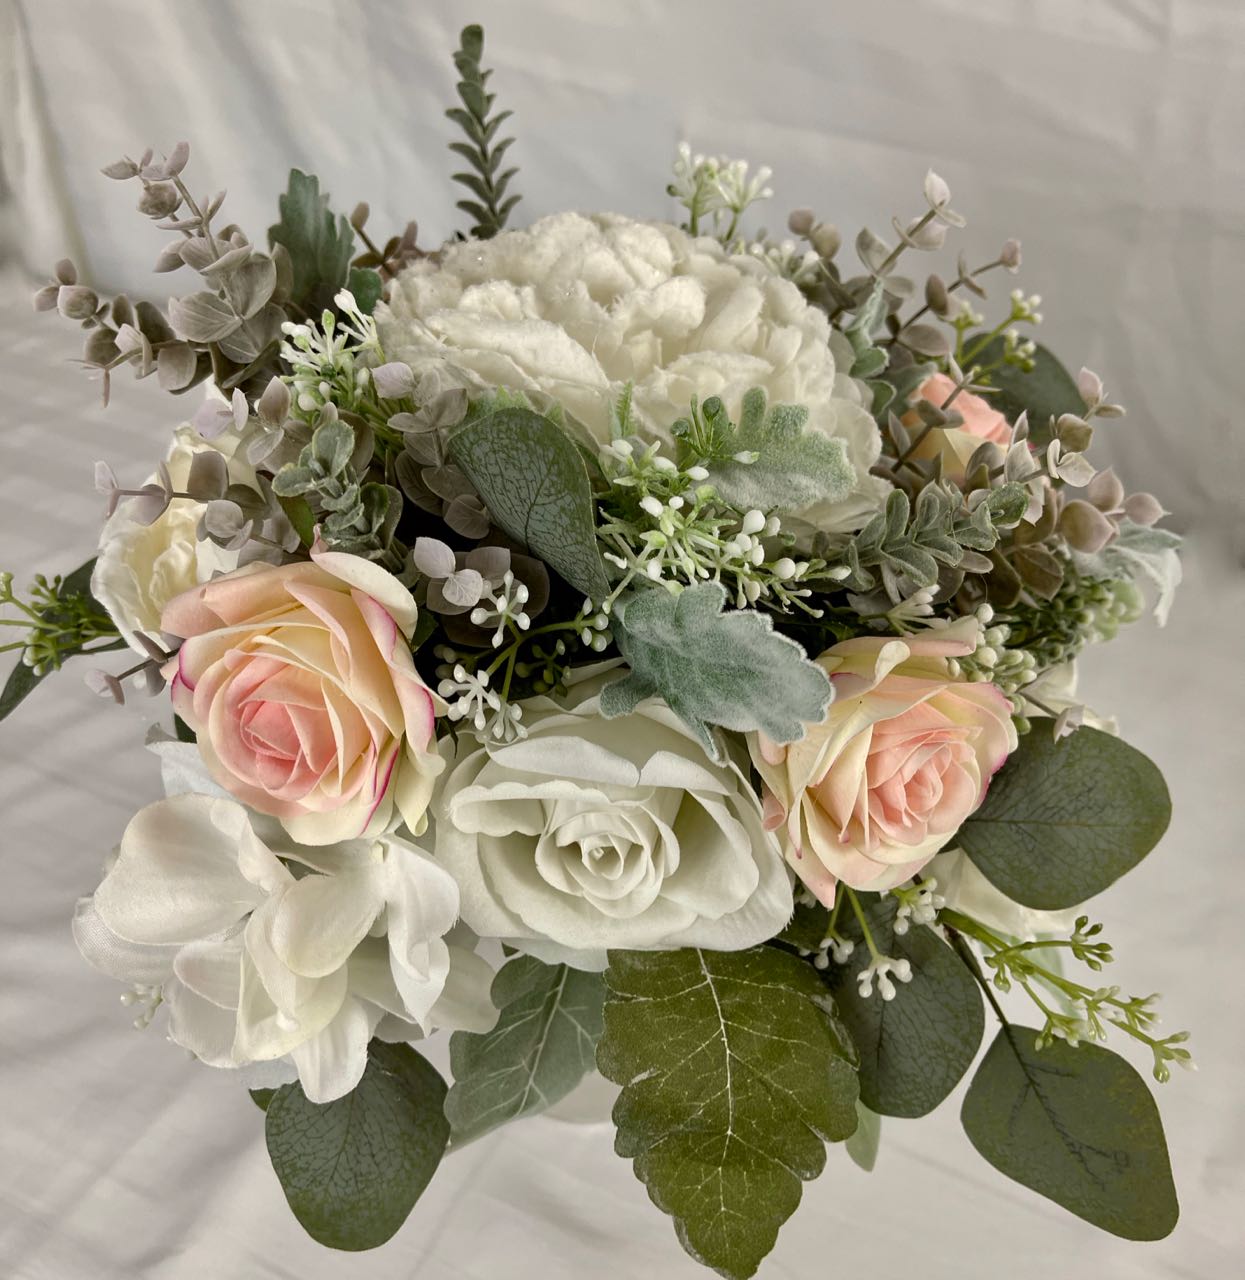 Bridesmaid Bouquet- sage green eucalyptus  combined with white and blsuh pink roses - Rent for five days for $59.00